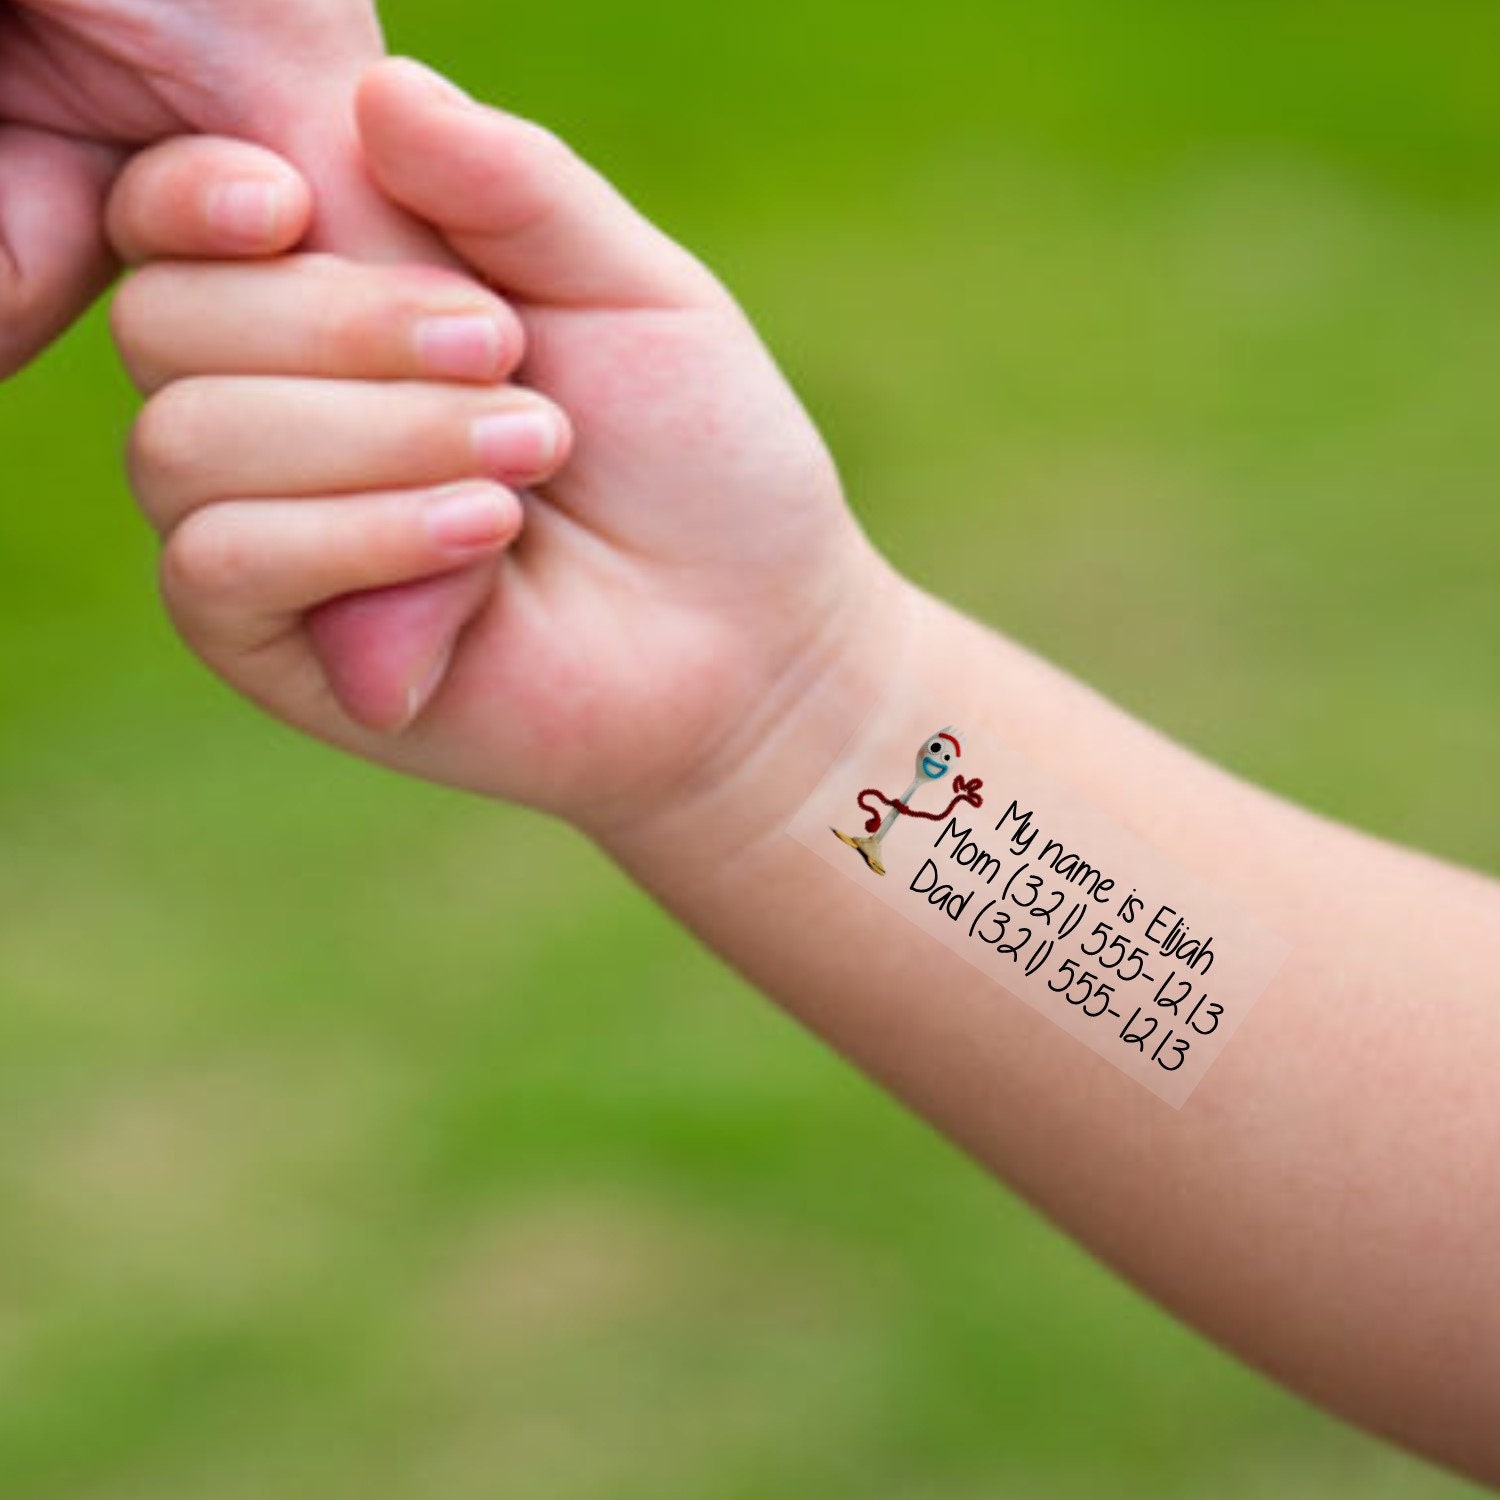 A Child with Temporary Tattoos on his Arms · Free Stock Photo